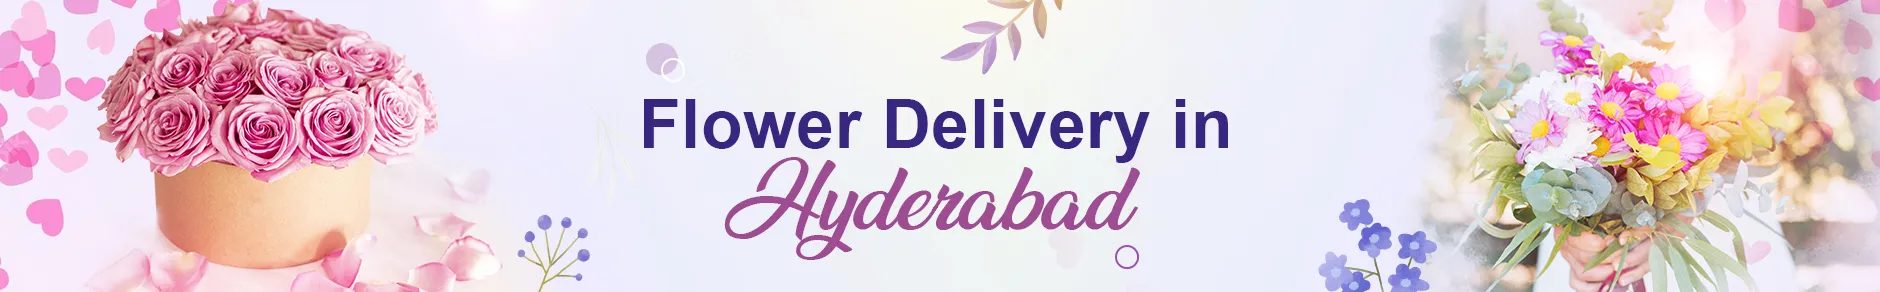 Flower Delivery in Hyderabad | Send Flowers to Agra in 2 hours | Free Delivery